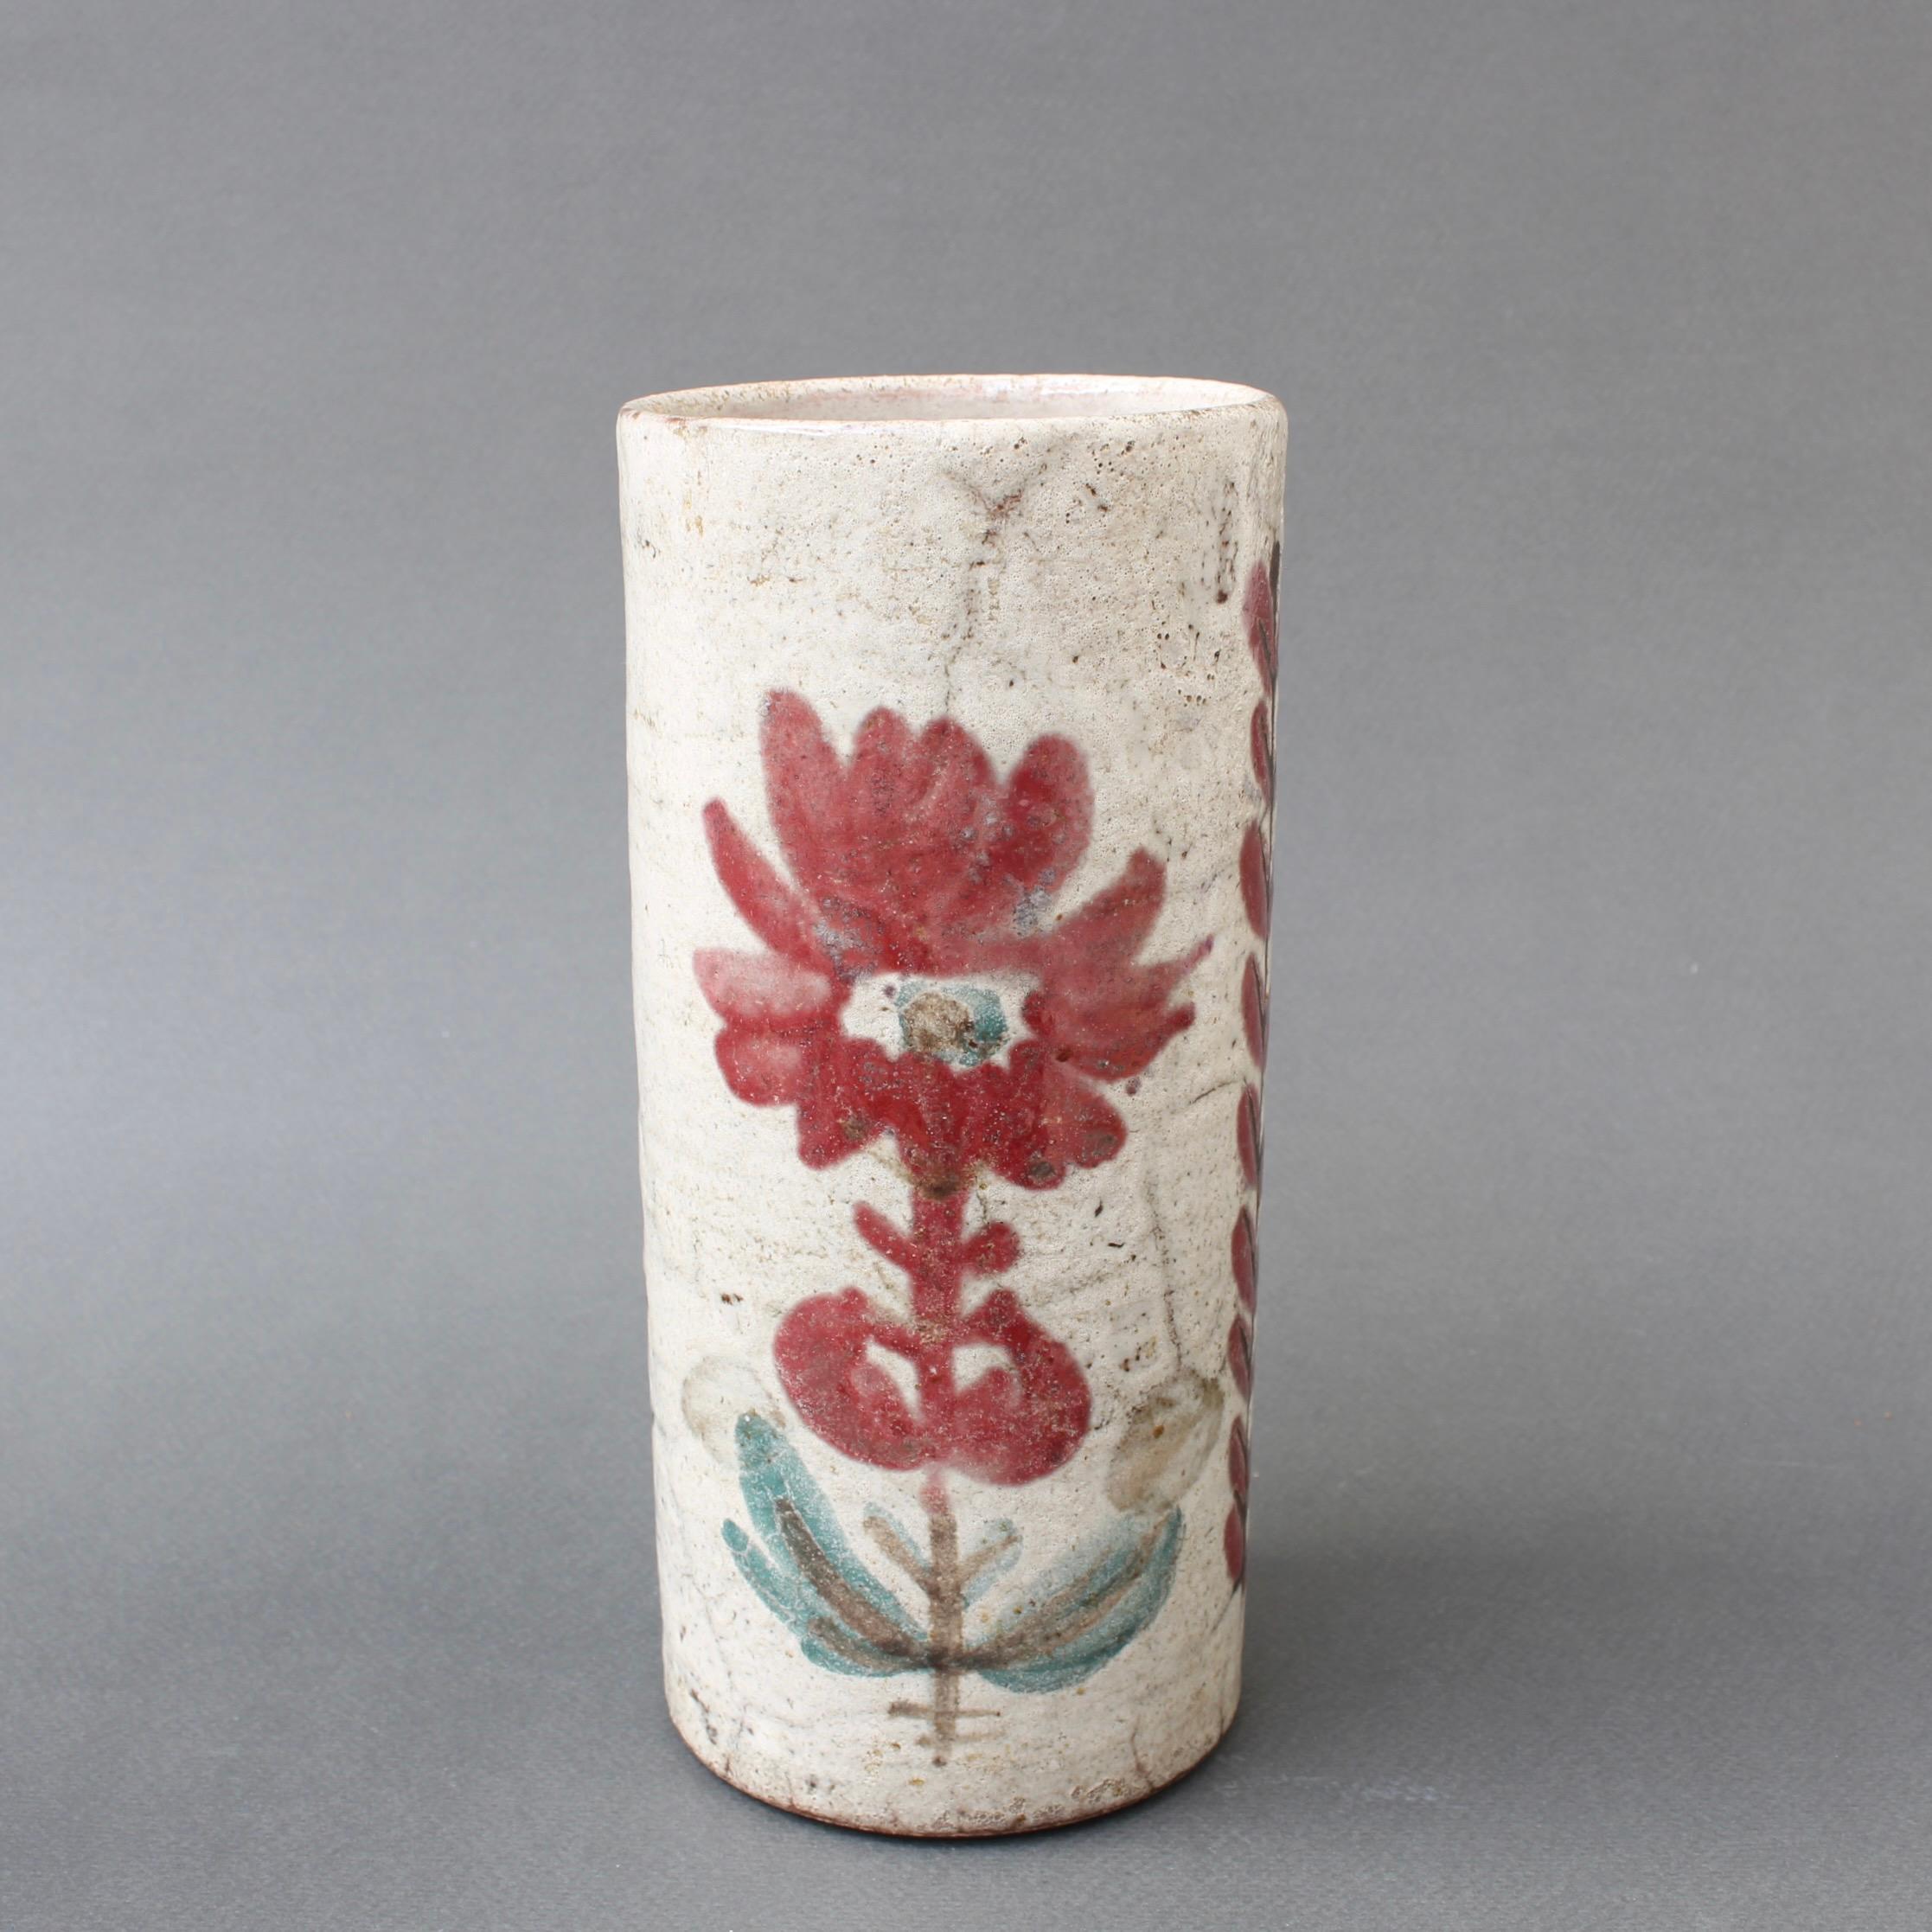 Vintage French ceramic flower vase by Le Mûrier (circa 1960s). A charming cylindrical vase in the unmistakable Le Mûrier Provençal style with their trademark stylised mulberry flower and upright leaf motif. The underlying glaze is a delicate